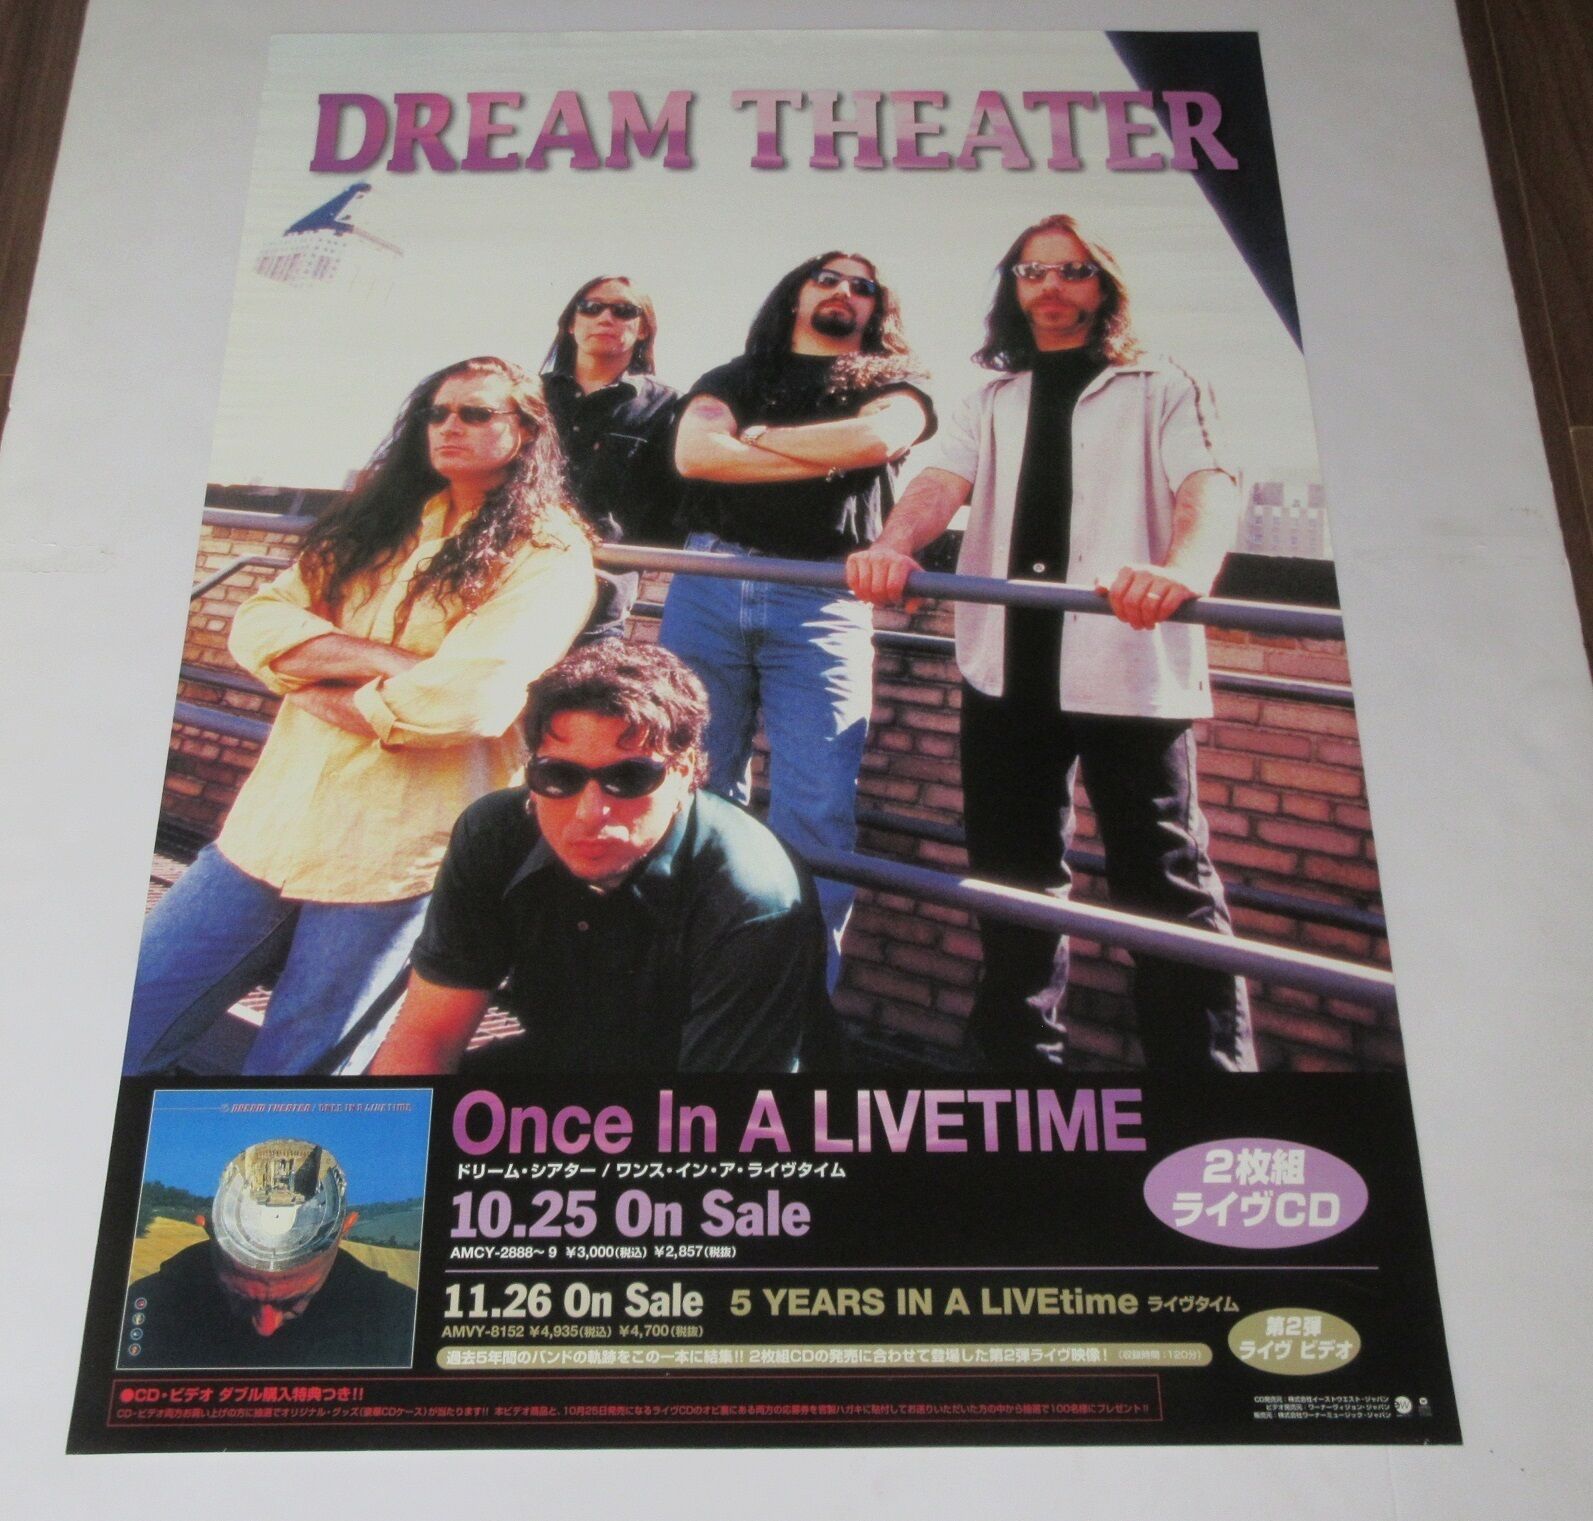 DREAM THEATER rare JAPAN PROMO ONLY 1998 release POSTER more DT listed LIVETIME